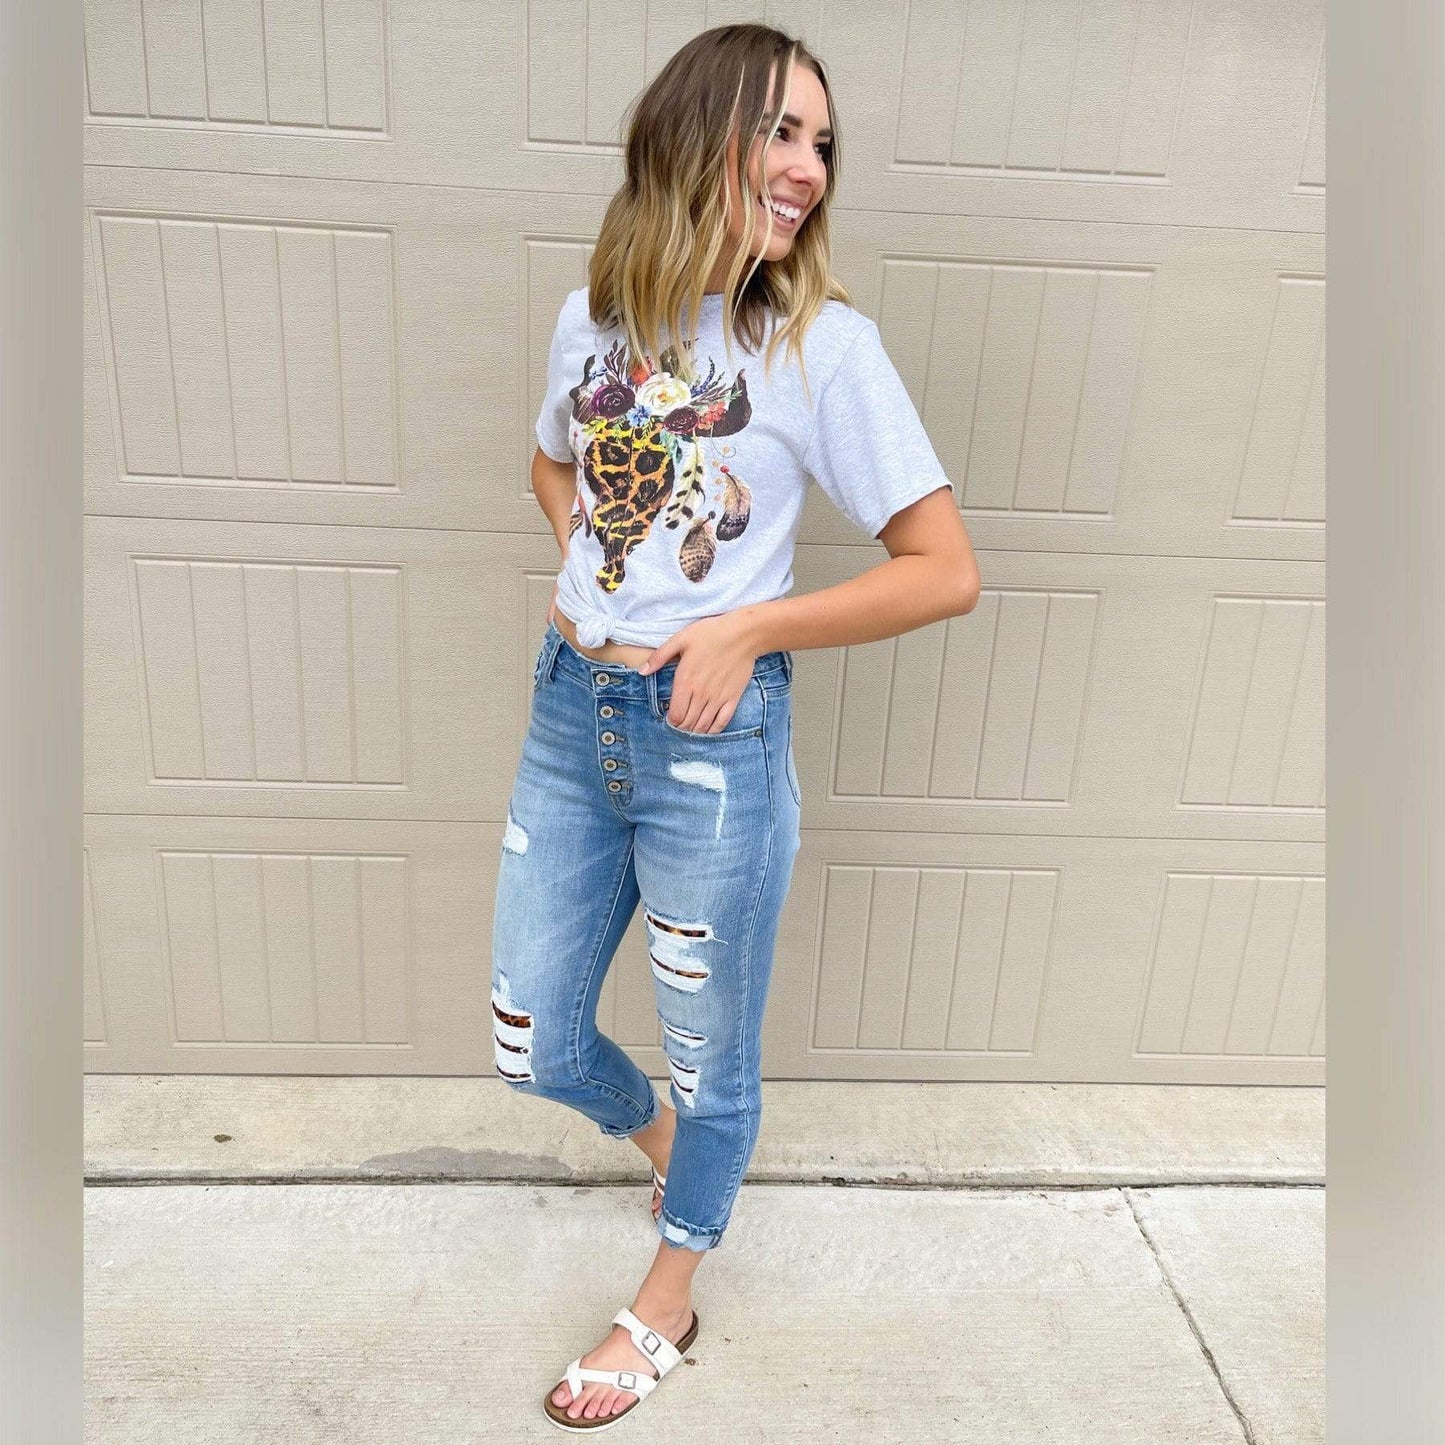 Envy Stylz Boutique Women - Apparel - Shirts - T-Shirts Leopard Floral Feather Bull Skull Graphic Tee